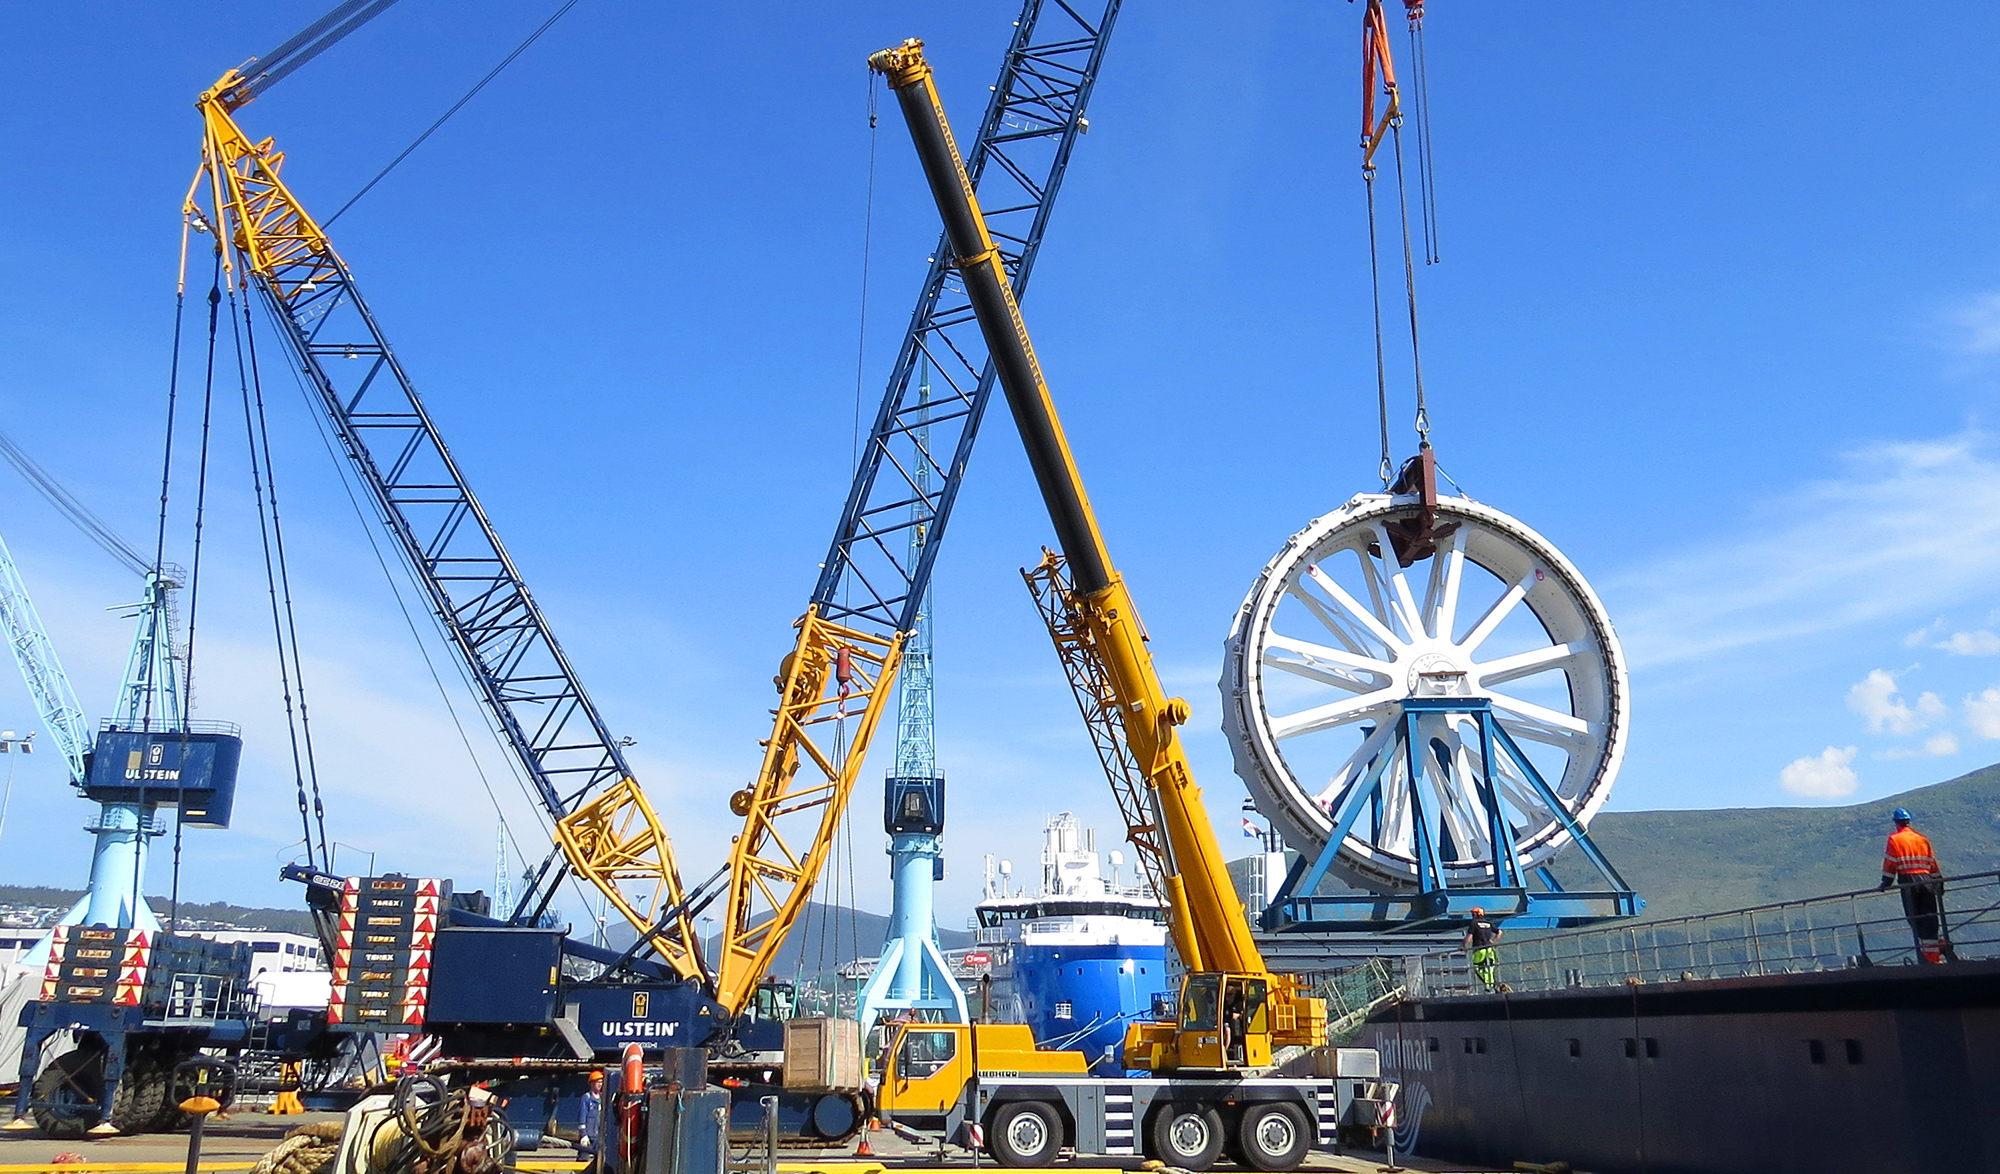 The capstan being unloaded by use of the heavylift division's mobile crane.